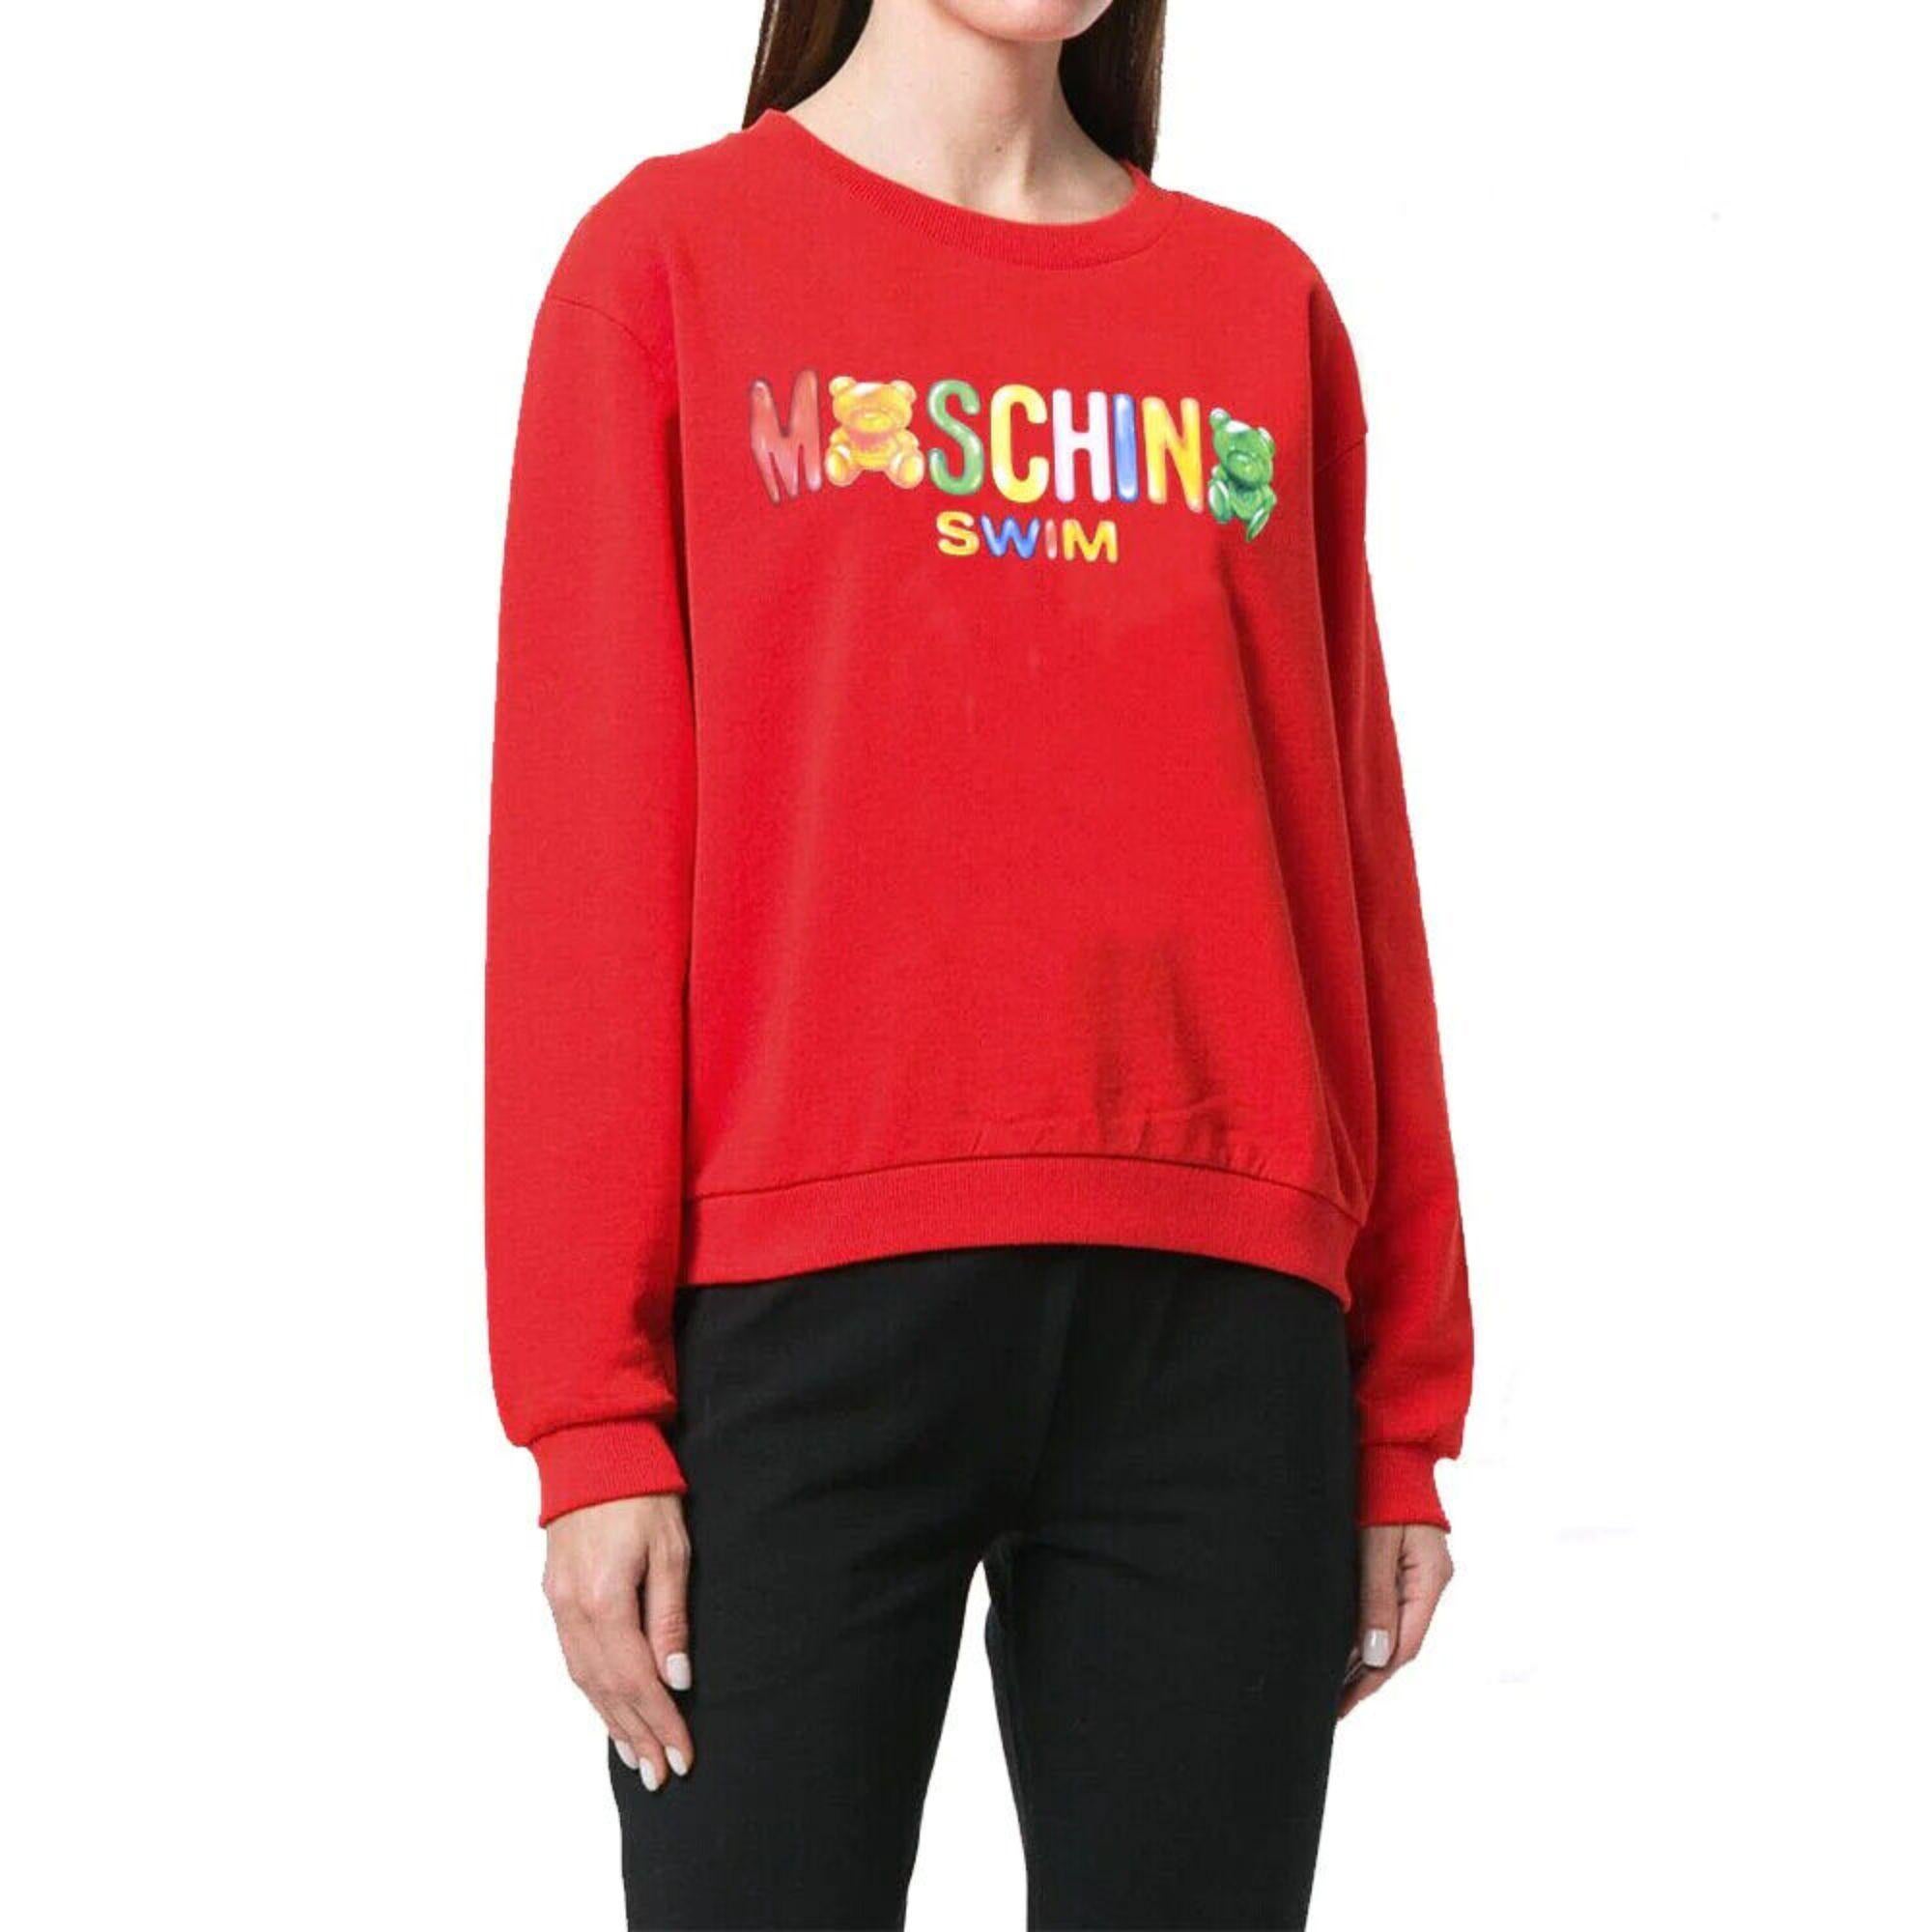 SS19 Moschino Swim Jeremy Scott Swim Jelly Gummy Teddy Bear Rouge Sweatshirt Candy

Informations supplémentaires :
MATERIAL : 100% coton
Couleur : Rouge
Taille : XS / US XXS
Style : Pull-over
Motif : Logo, ours en gomme
Dimensions : D'épaule à